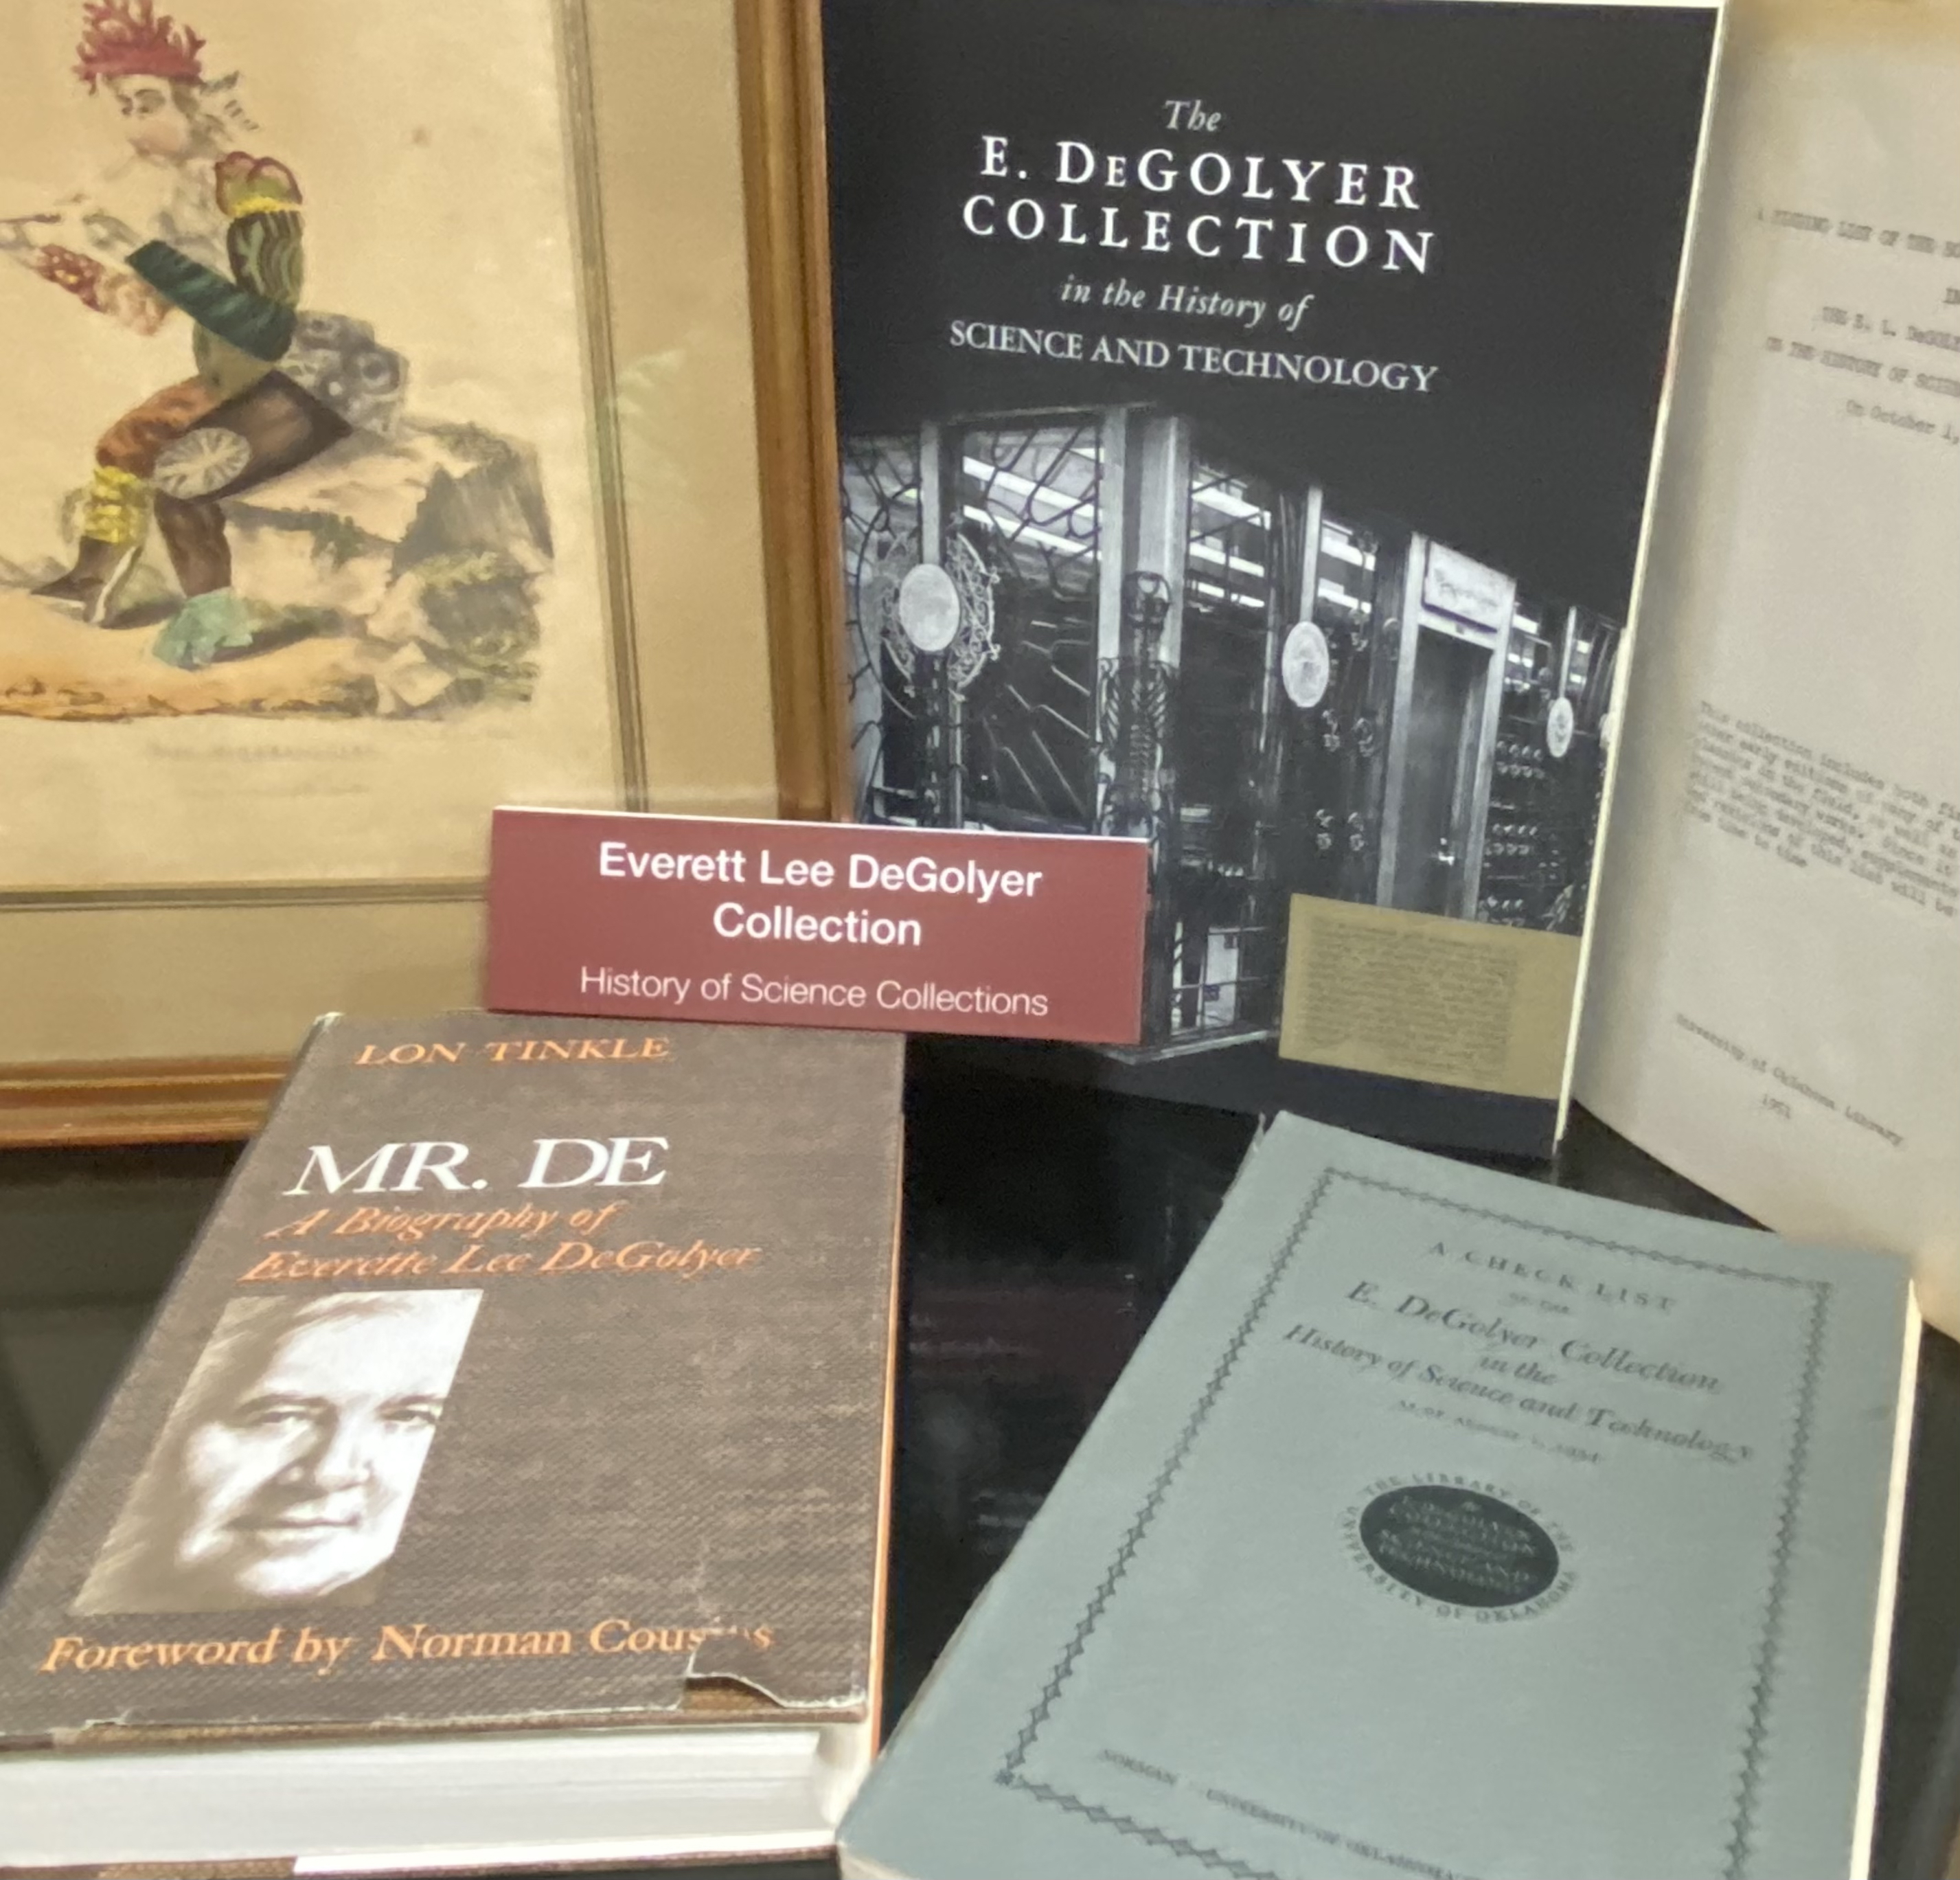 Photo of shelf of materials with sign "Everette Lee DeGolyer Collection." Includes colored print, books, and collection catalog.